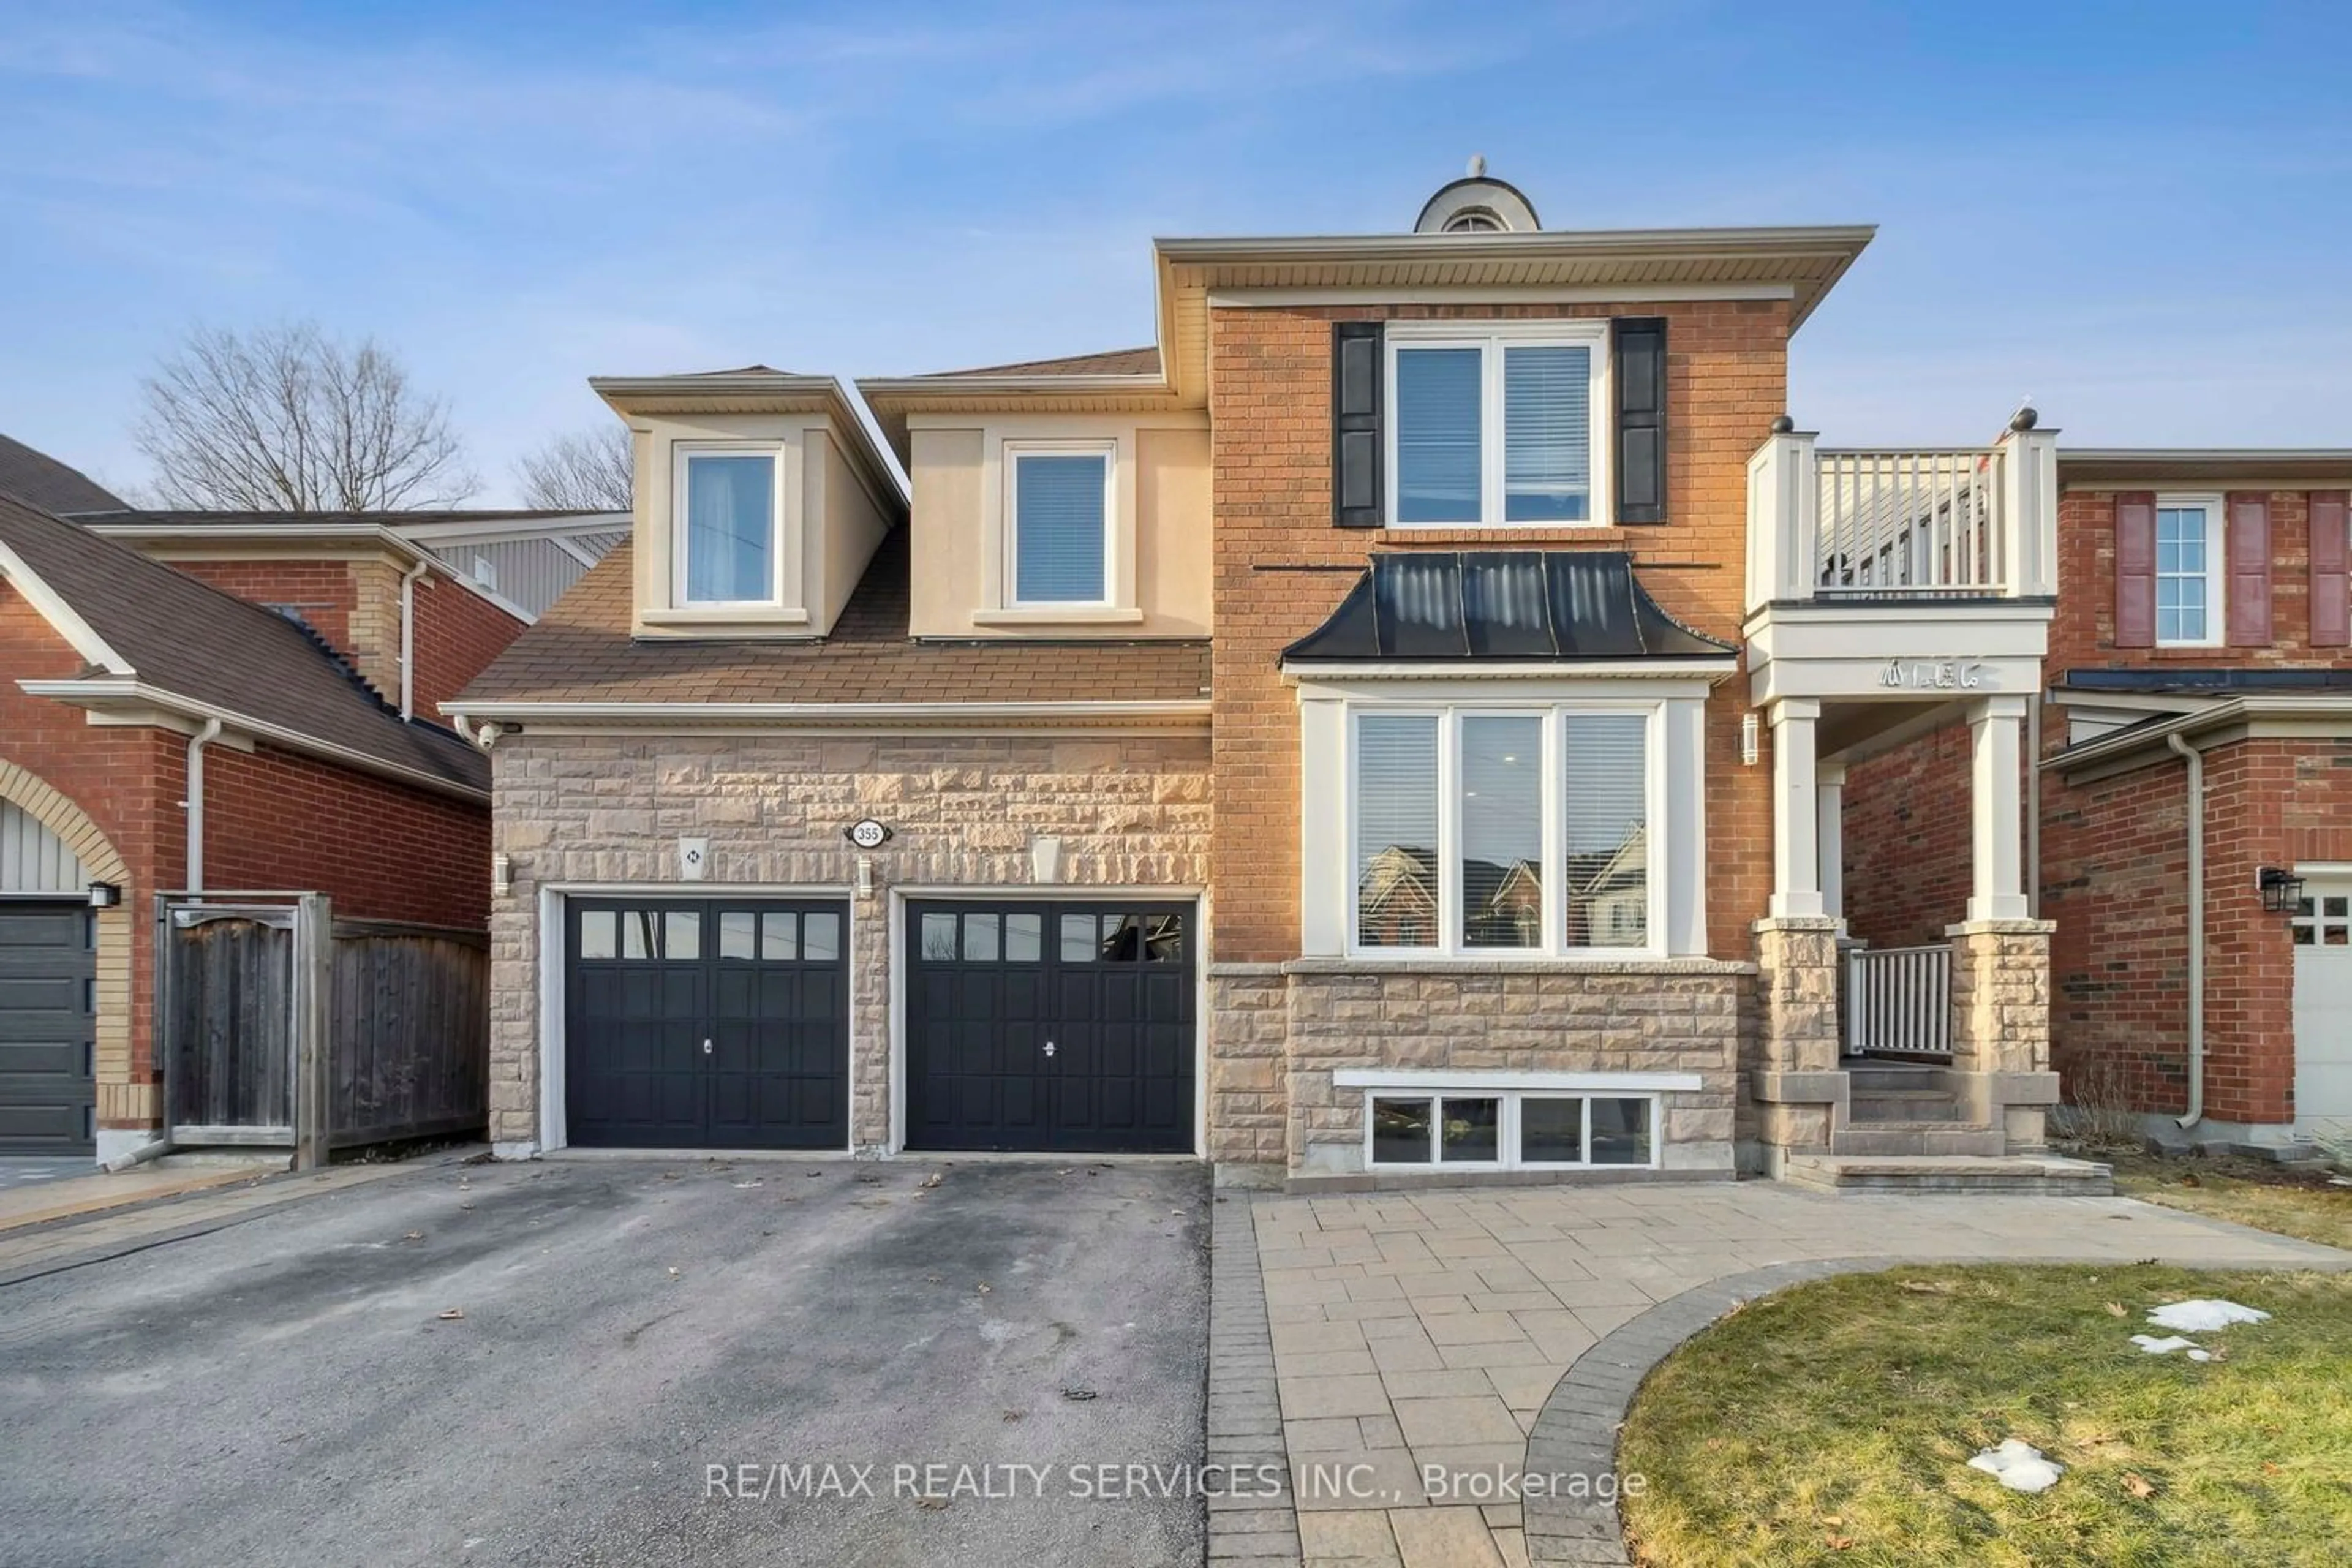 Home with brick exterior material for 355 Cheryl Mews Blvd, Newmarket Ontario L3X 3J7